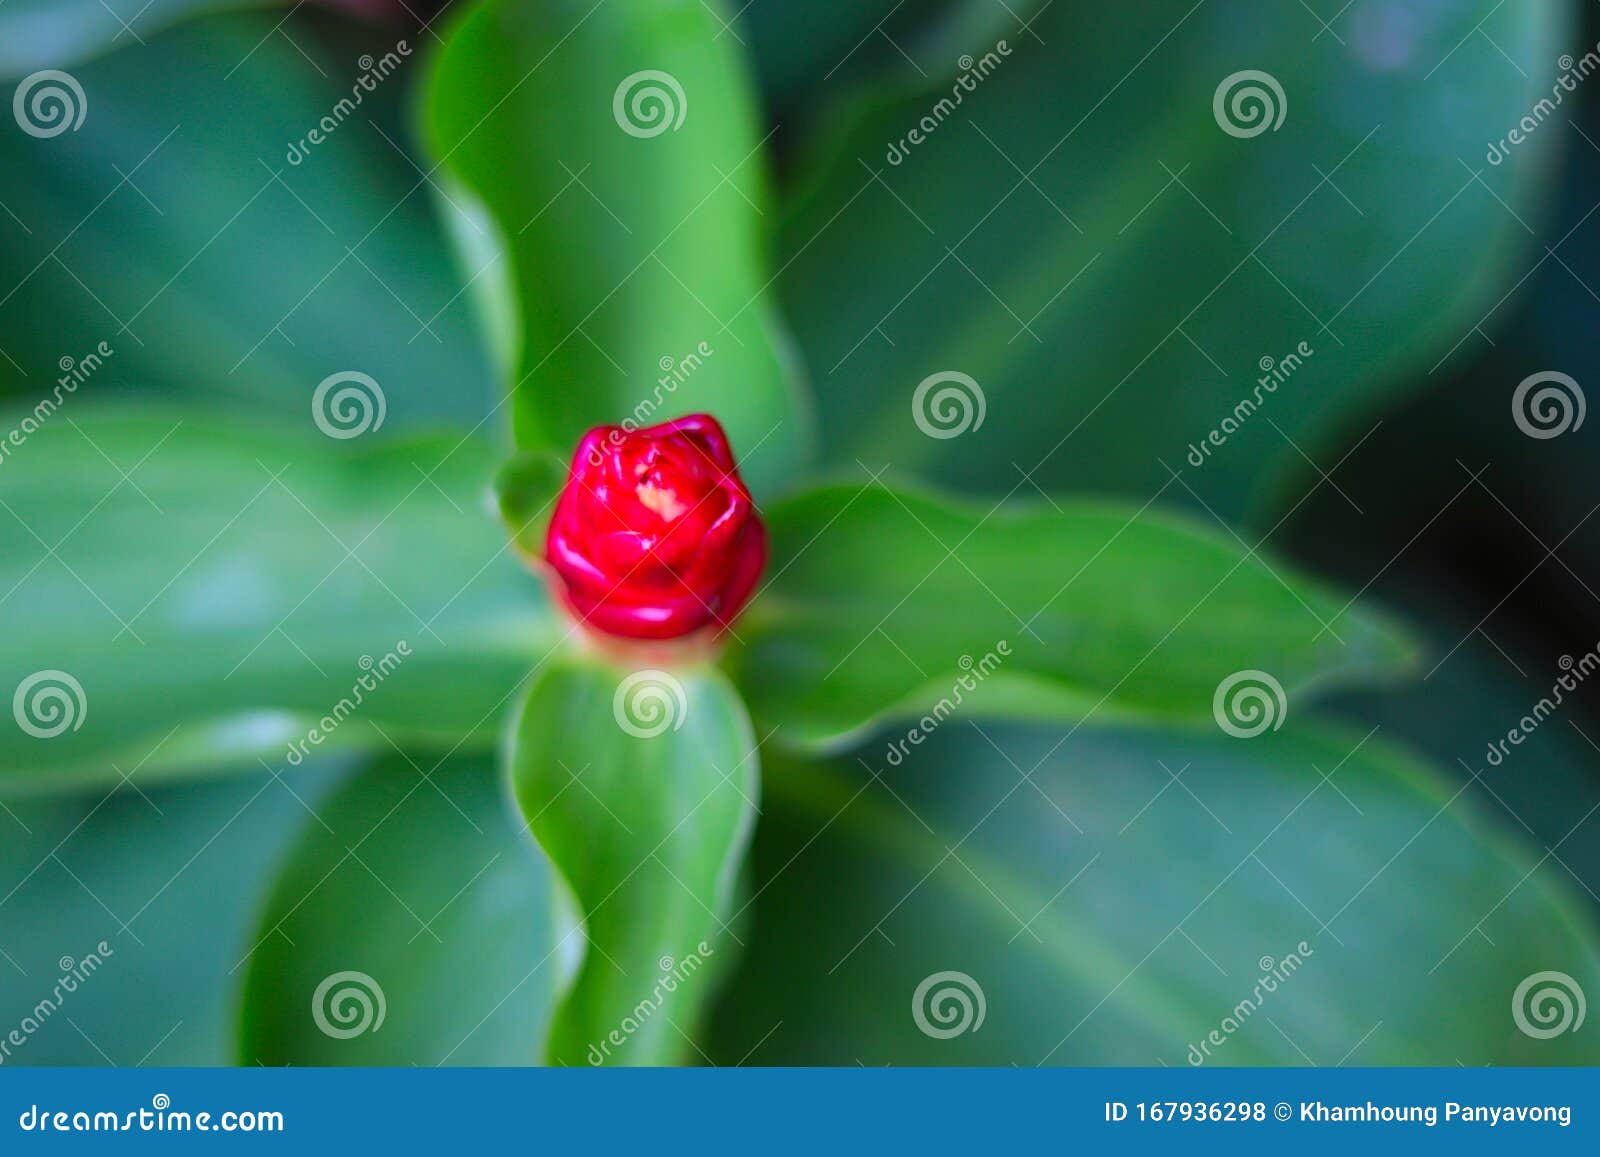 Costus Spicatus Also Known As Spiked Spiralflag Ginger Or Indian Head Ginger Is A Species Of Herbaceous Plant In The Costaceae Fa 库存照片 图片包括有植物群 花瓣